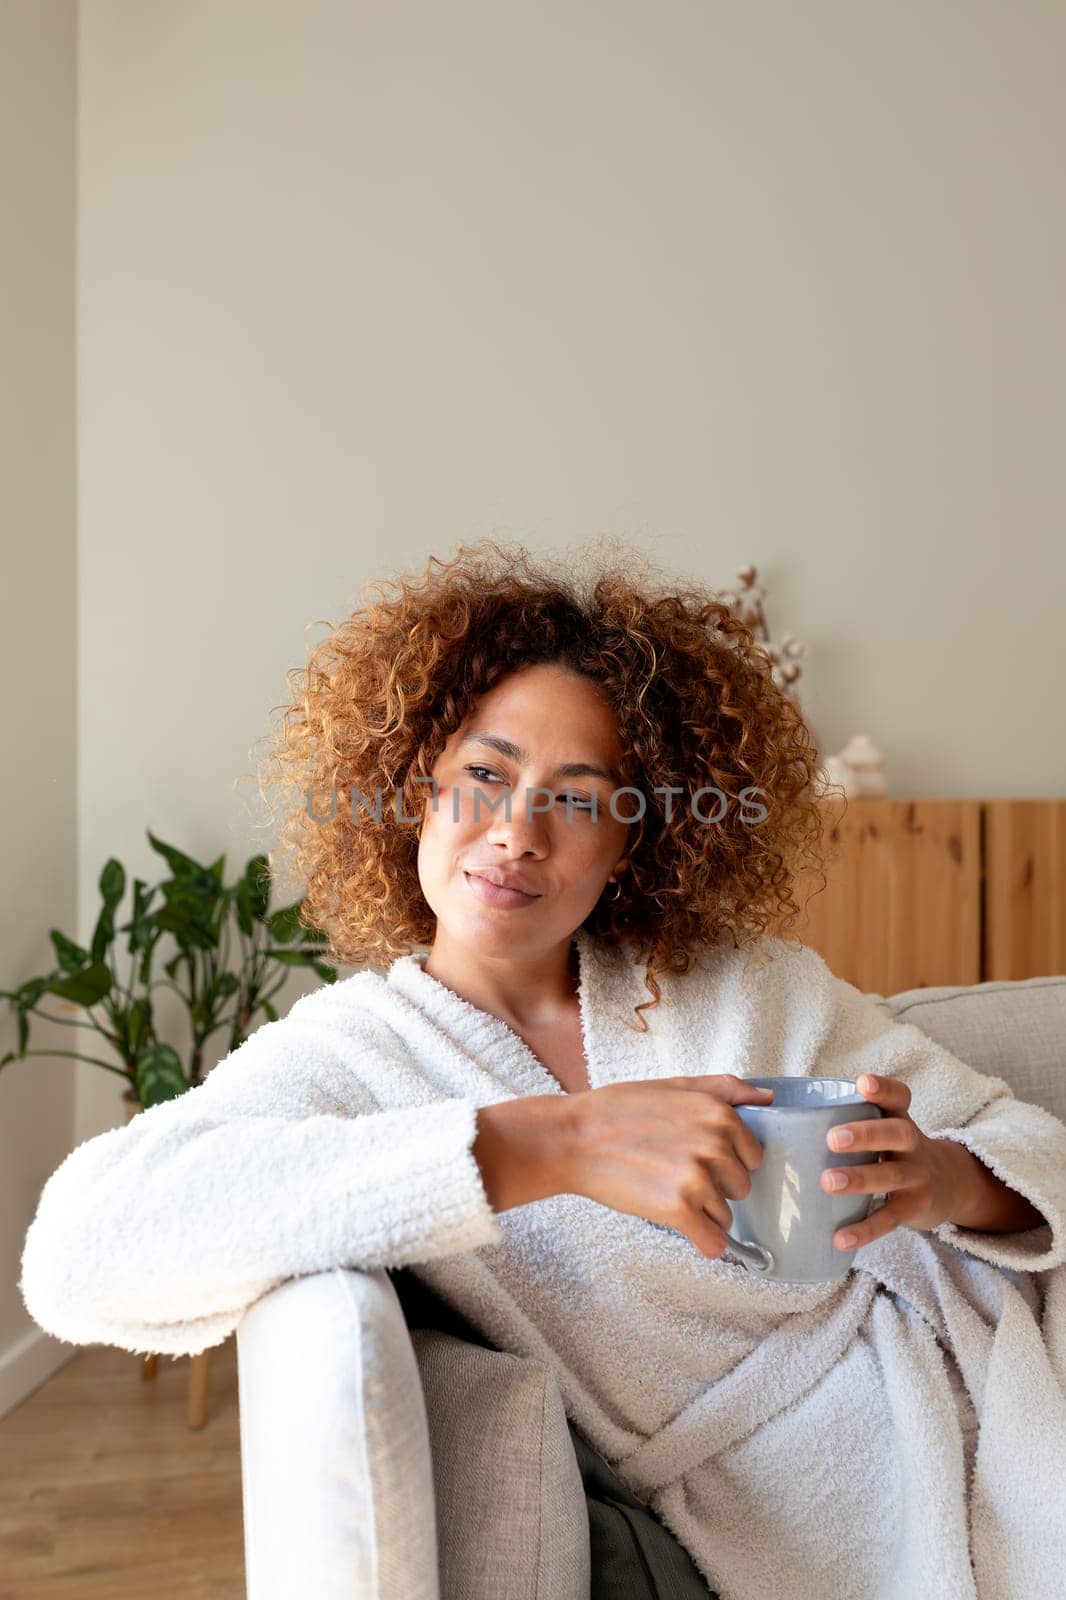 Pensive multiracial woman relaxing at home, sitting on the sofa drinking tea looking out the window. Copy space.Vertical by Hoverstock